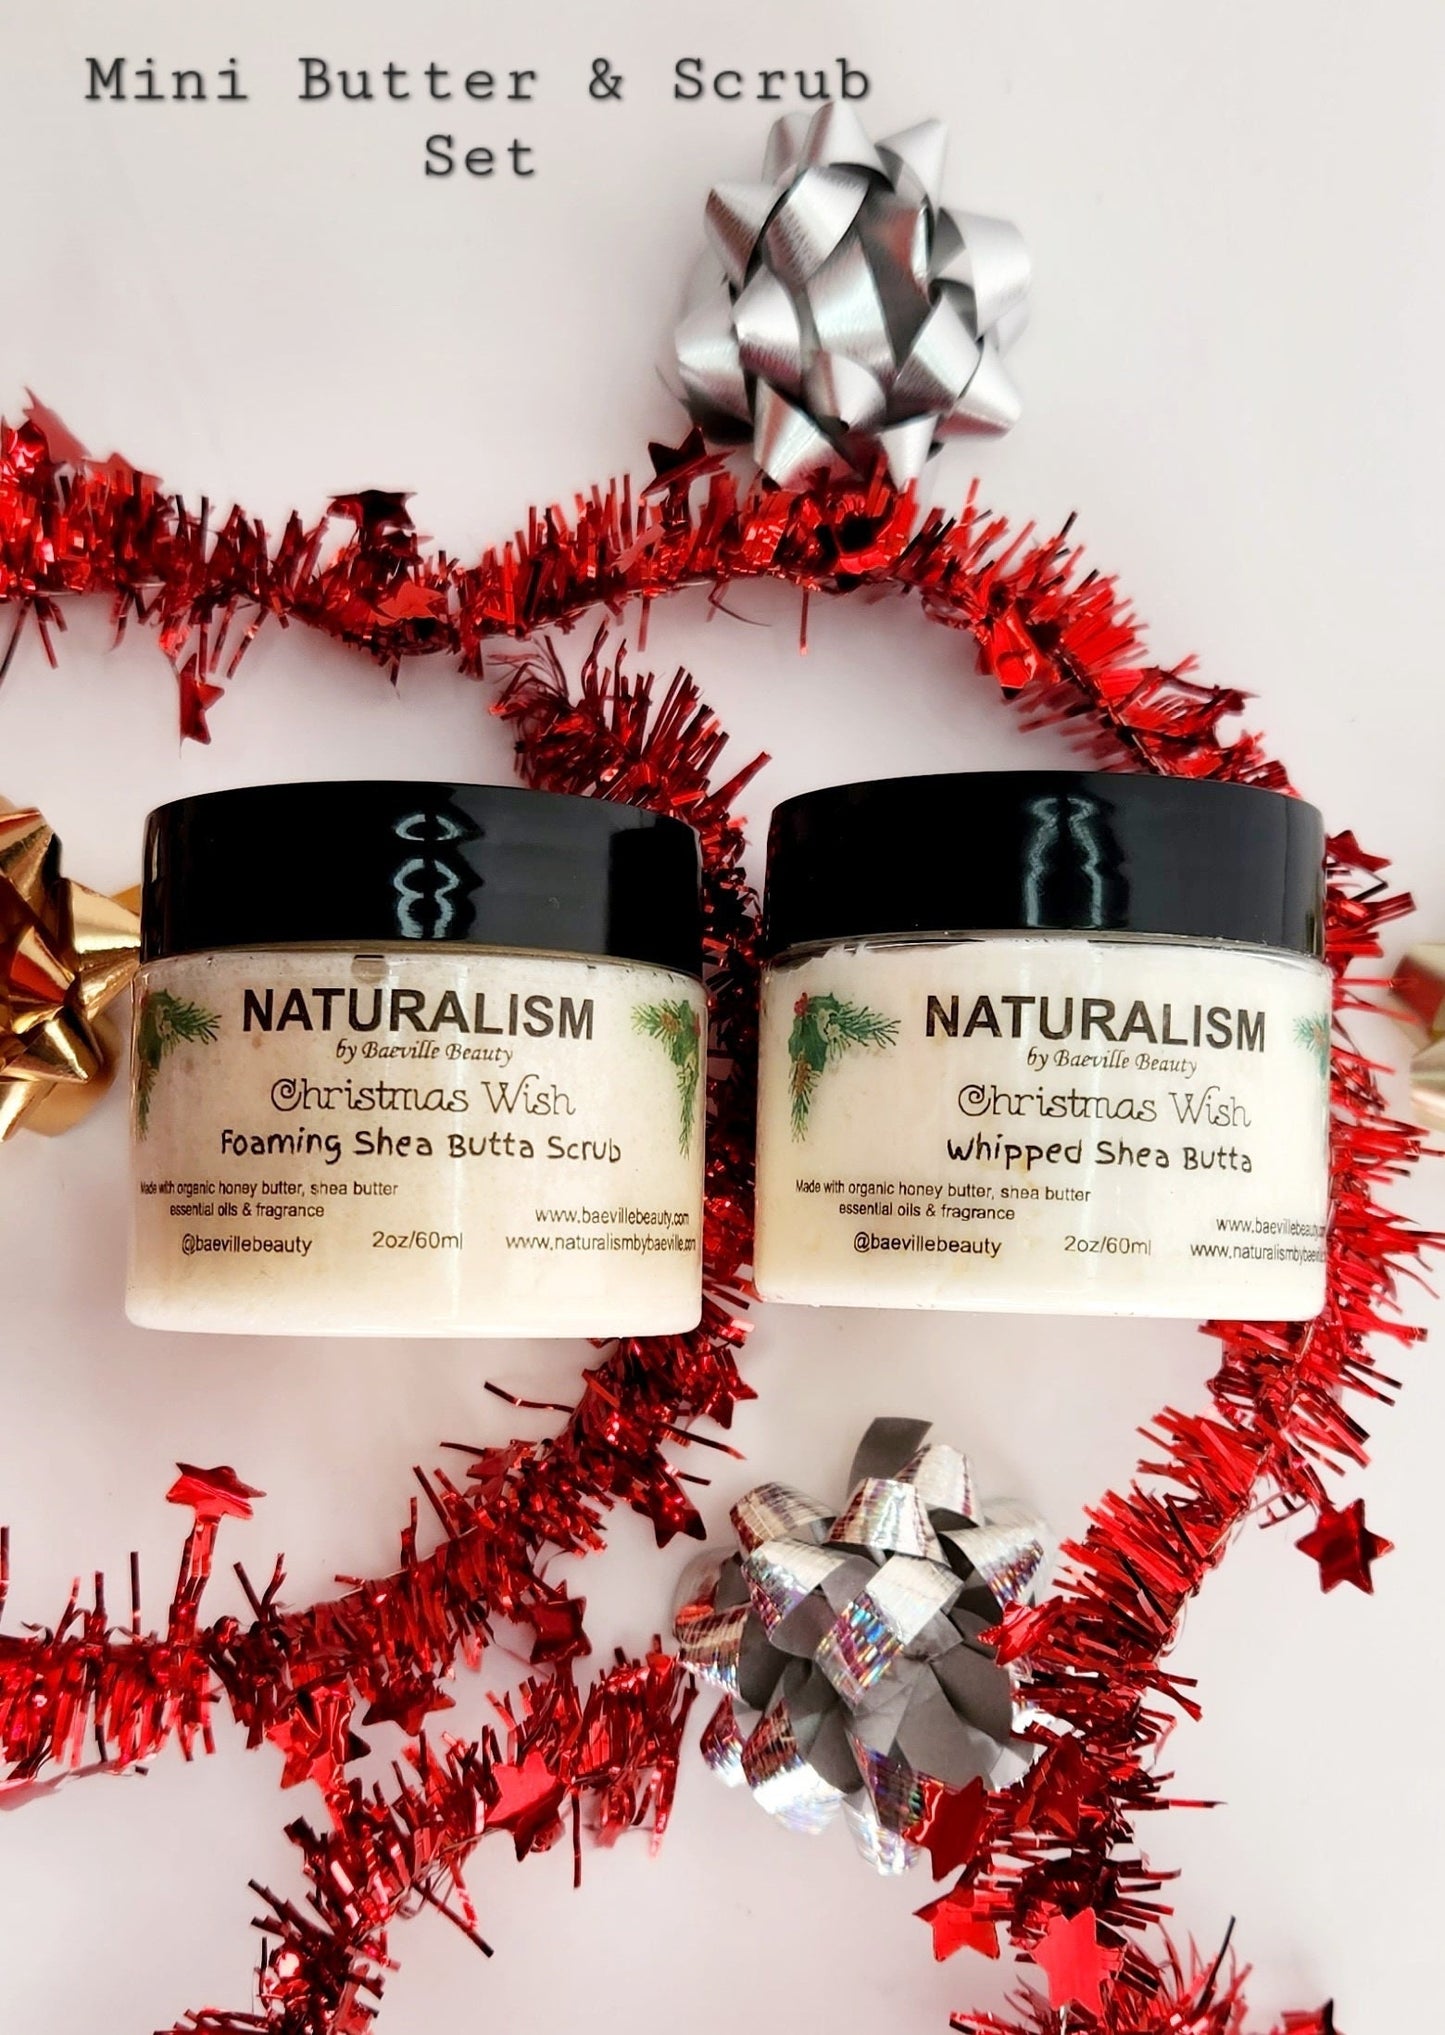 Holiday Scents Shea Butter Foaming Scrub & Body Butter Set |Natural Ingredients| Whipped Sugar Scrub|Creamy Bath Frosting|Gifts